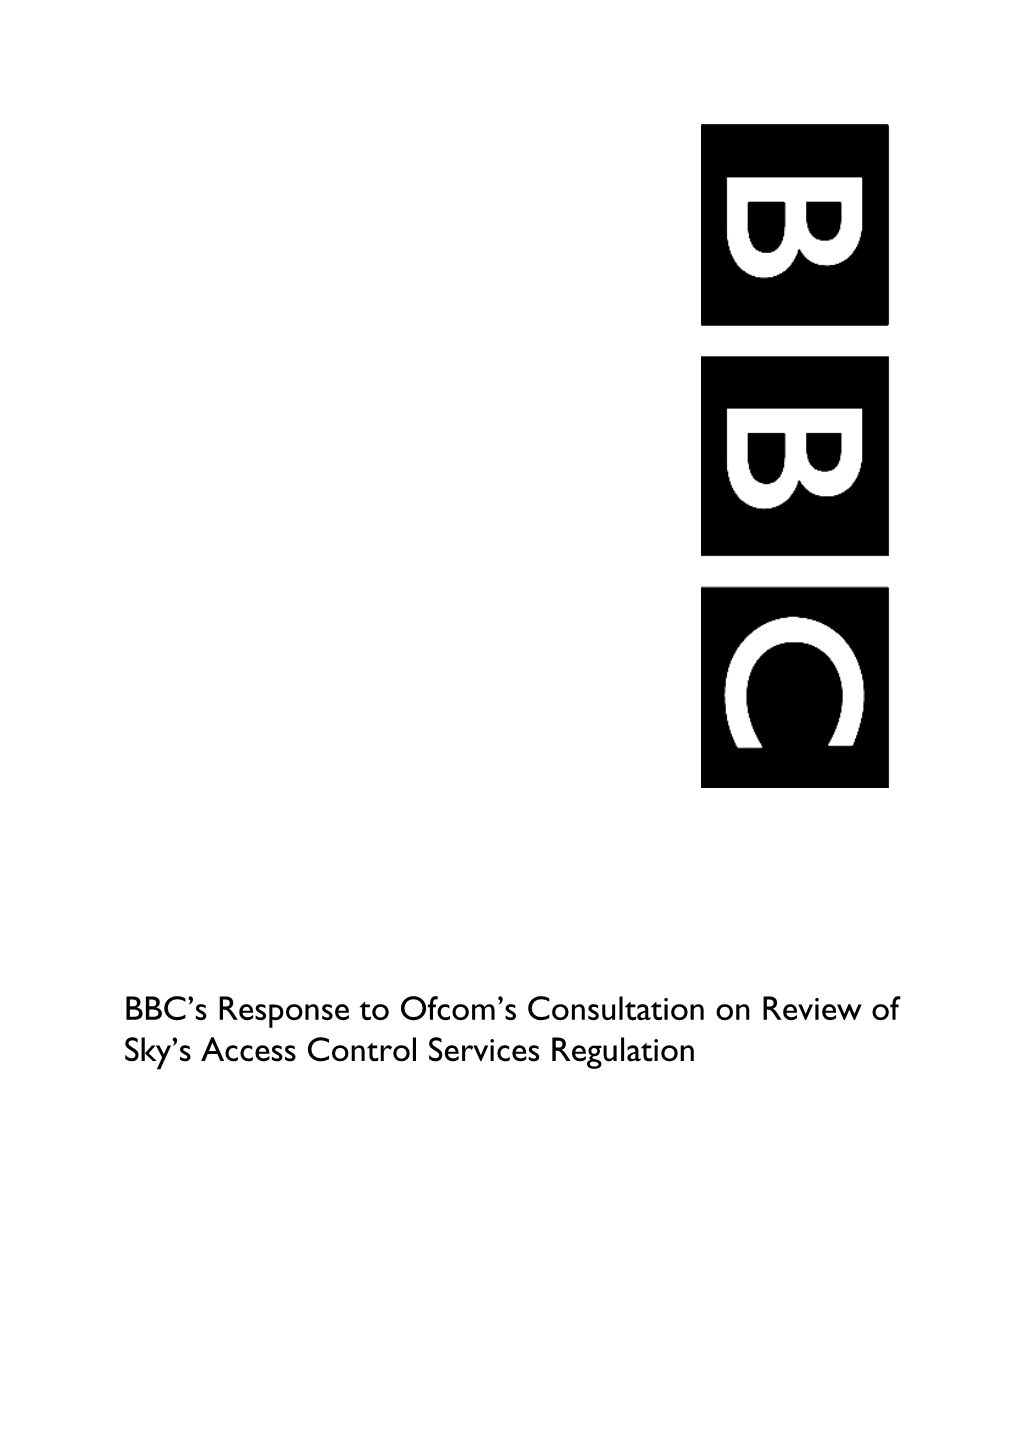 BBC's Response to Ofcom's Consultation on Review of Sky's Access Control Services Regulation